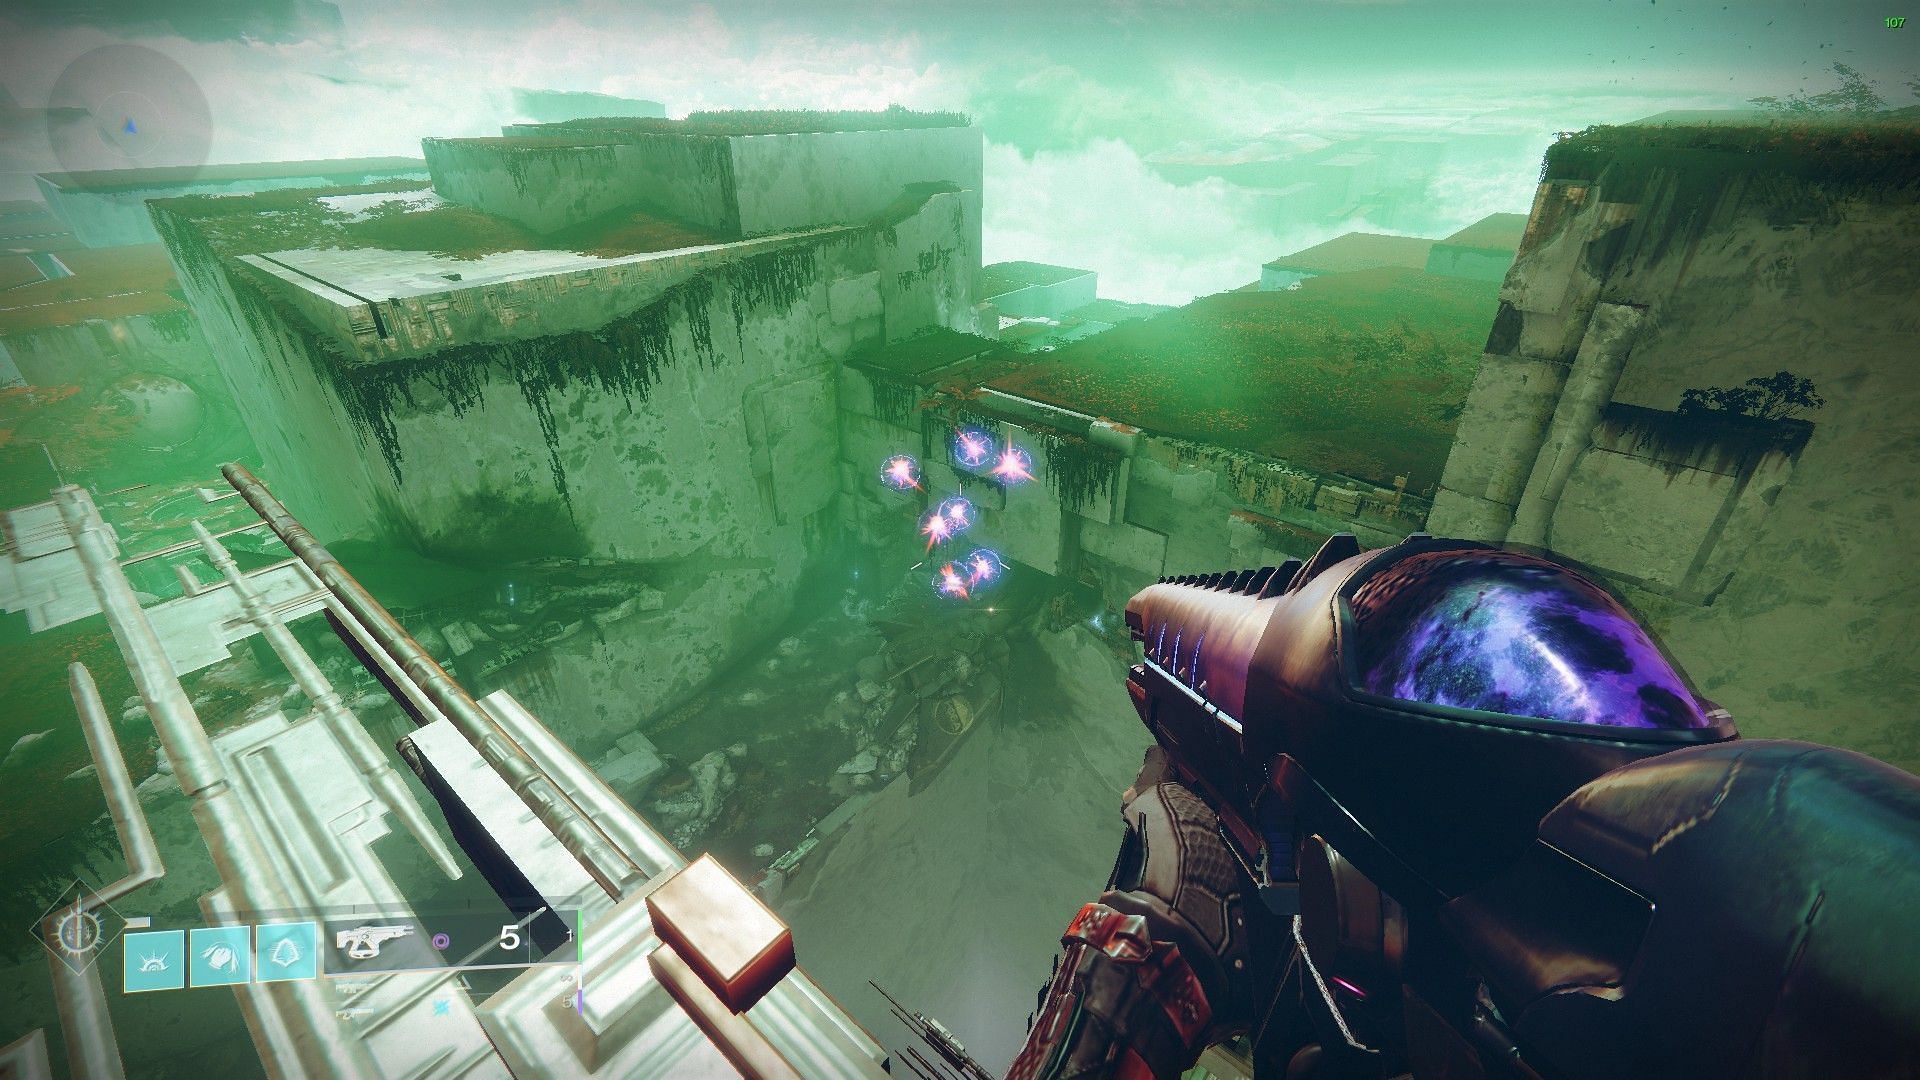 Telesto is shooting out bolts in the air (Image via Destiny 2)